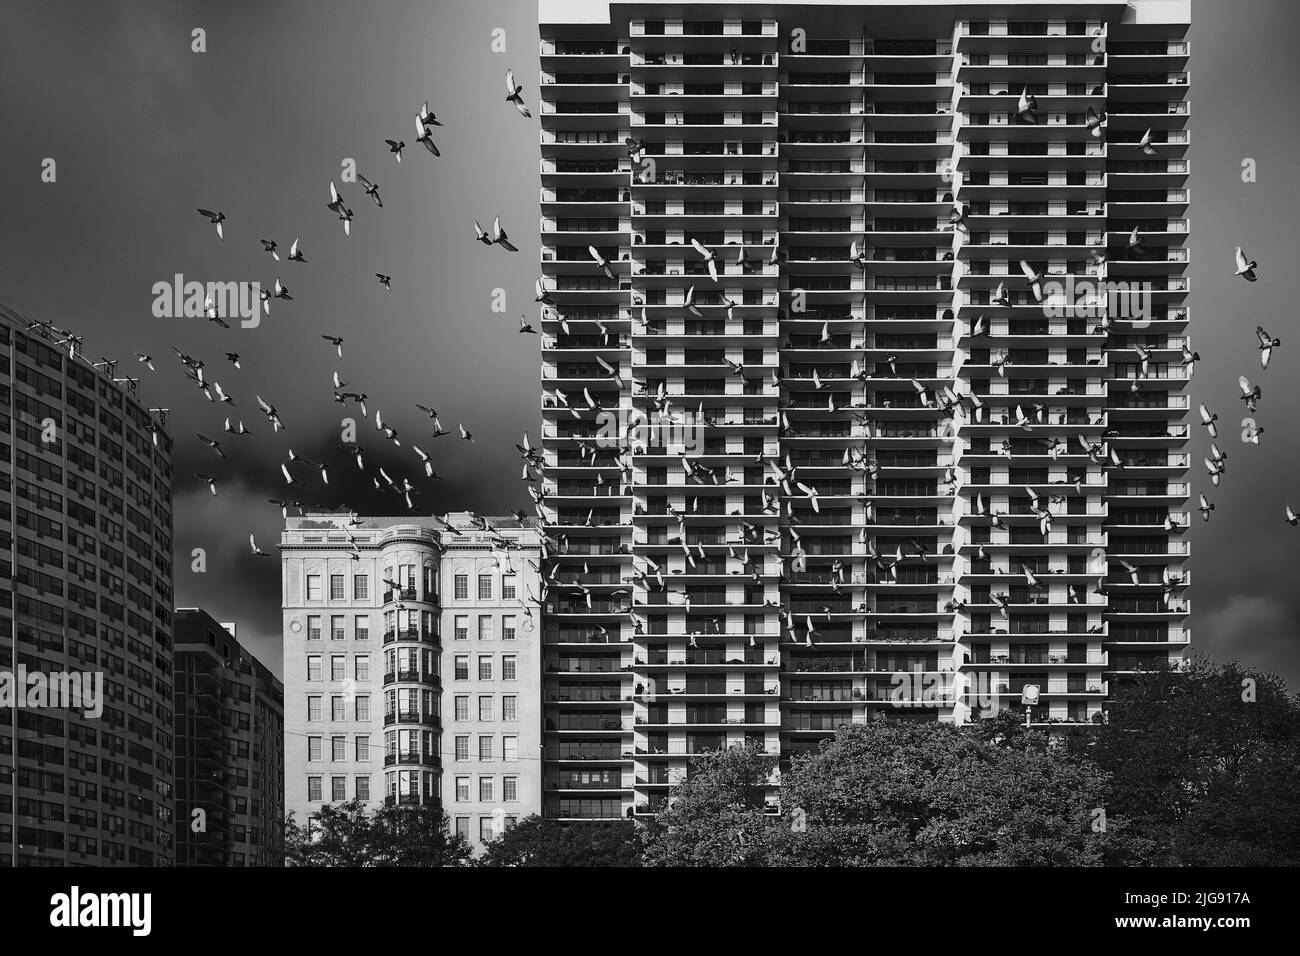 Chicago buildings with pigeons in flight Stock Photo